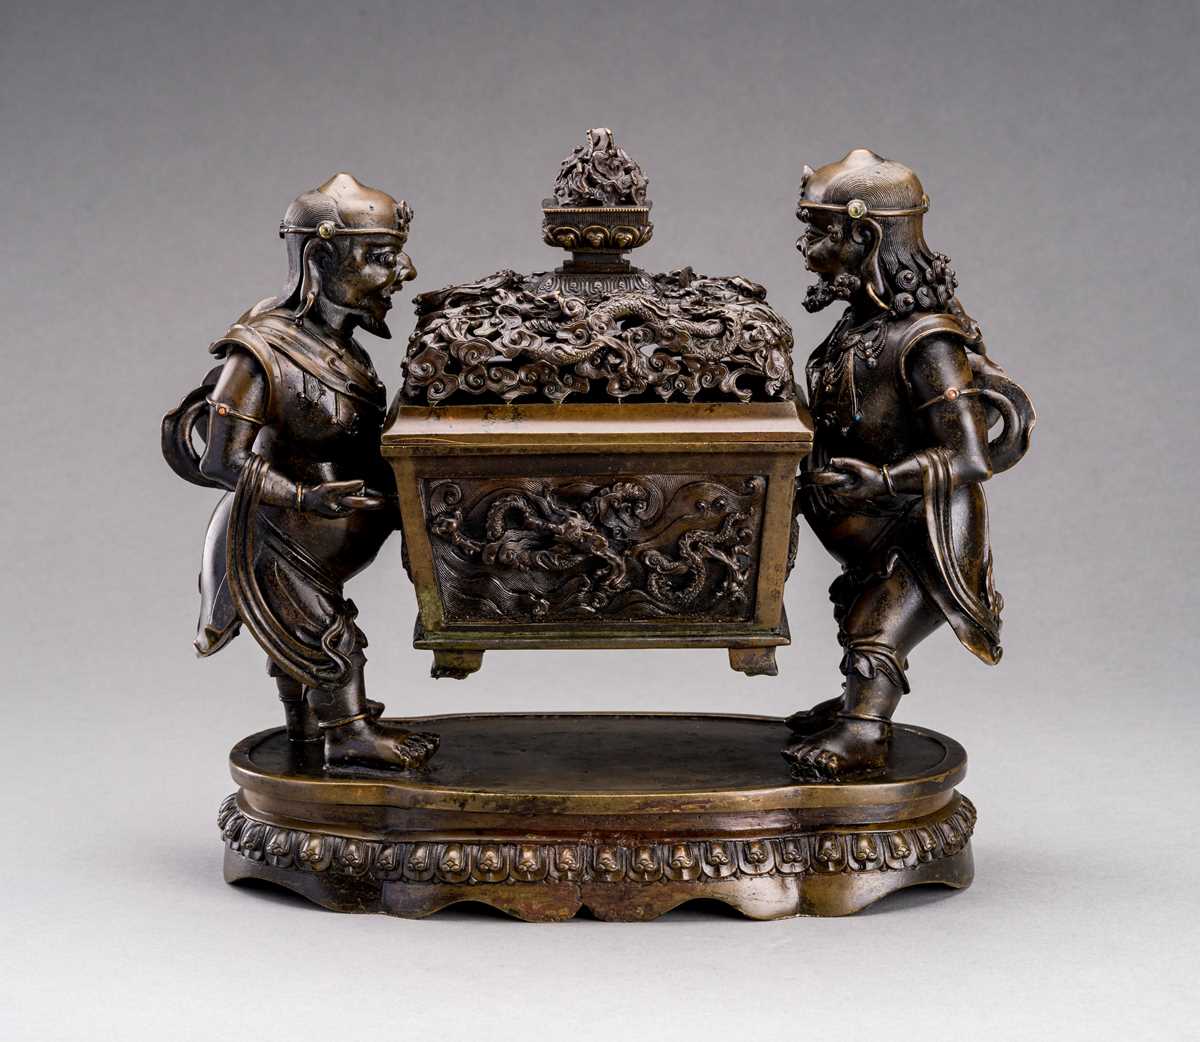 Lot 253 - A LARGE BRONZE 'FOREIGNERS' CENSER, QING